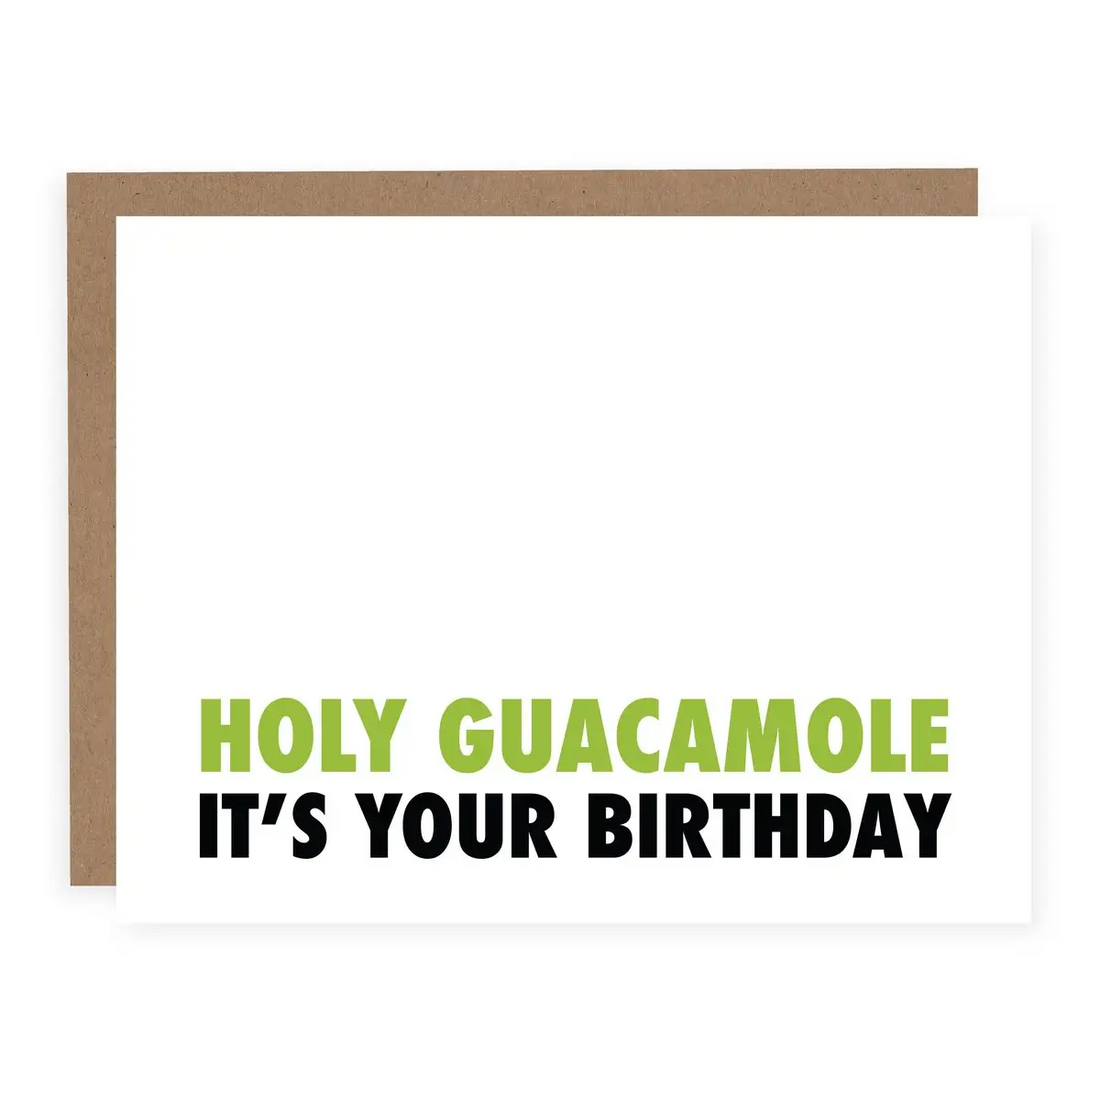 Holy Guacamole It’s Your Birthday Card